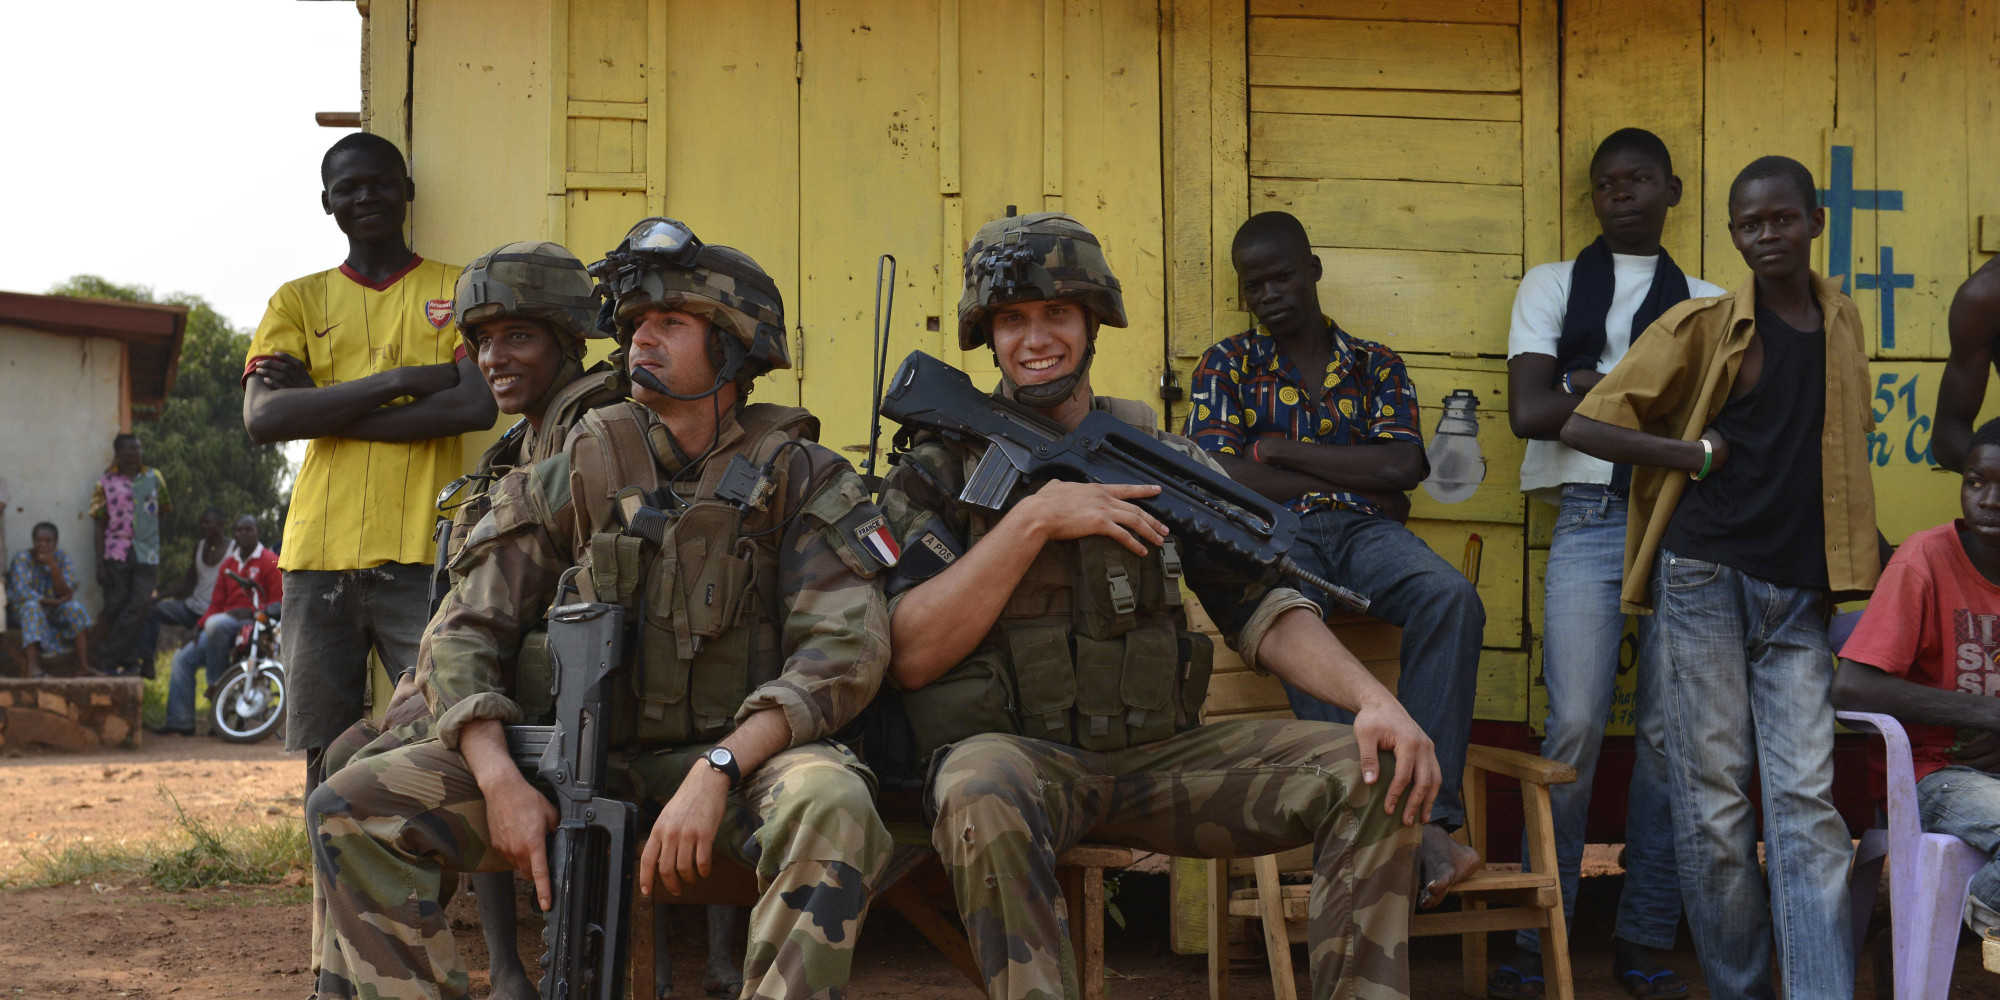 French soldiers from the Sangaris operation take a rest during a patrol at the Castor district of Bangui on January 4, 2014. The Central African Republic, already chronically unstable, plunged into chaos after mainly Muslim Seleka rebels staged the coup last year. Last month, French troops intervened to try to stem resurging violence pitting former rebels against militias from the country's Christian majority bolstered by fighters loyal to the ousted regime. AFP PHOTO / MIGUEL MEDINA